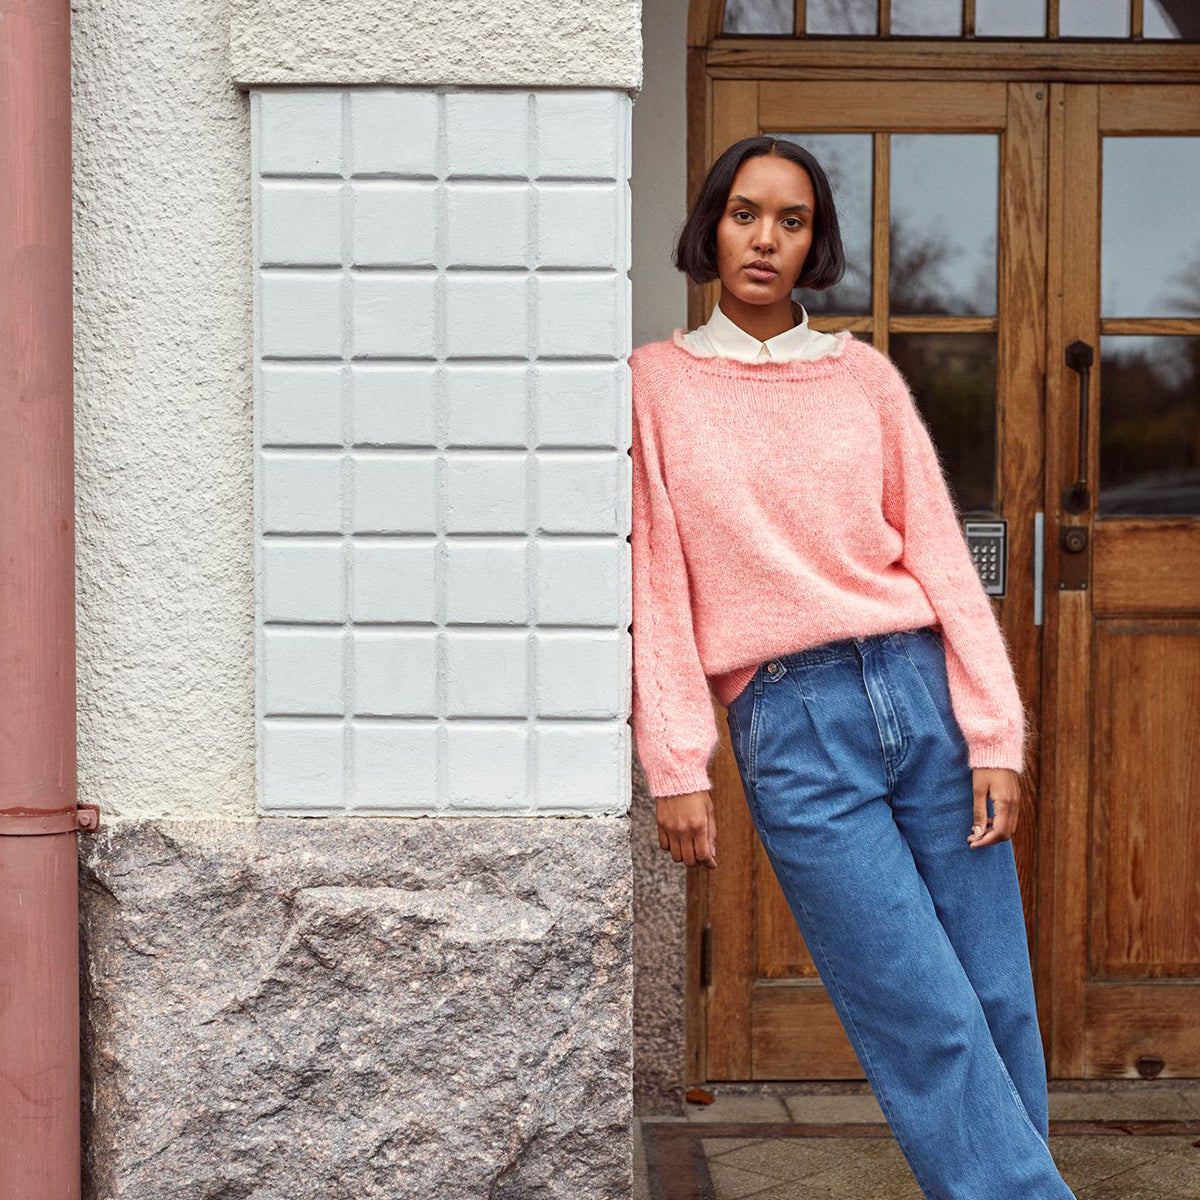 LAINE NORDIC KNIT LIFE - ISSUE 16 - Stephen & Penelope